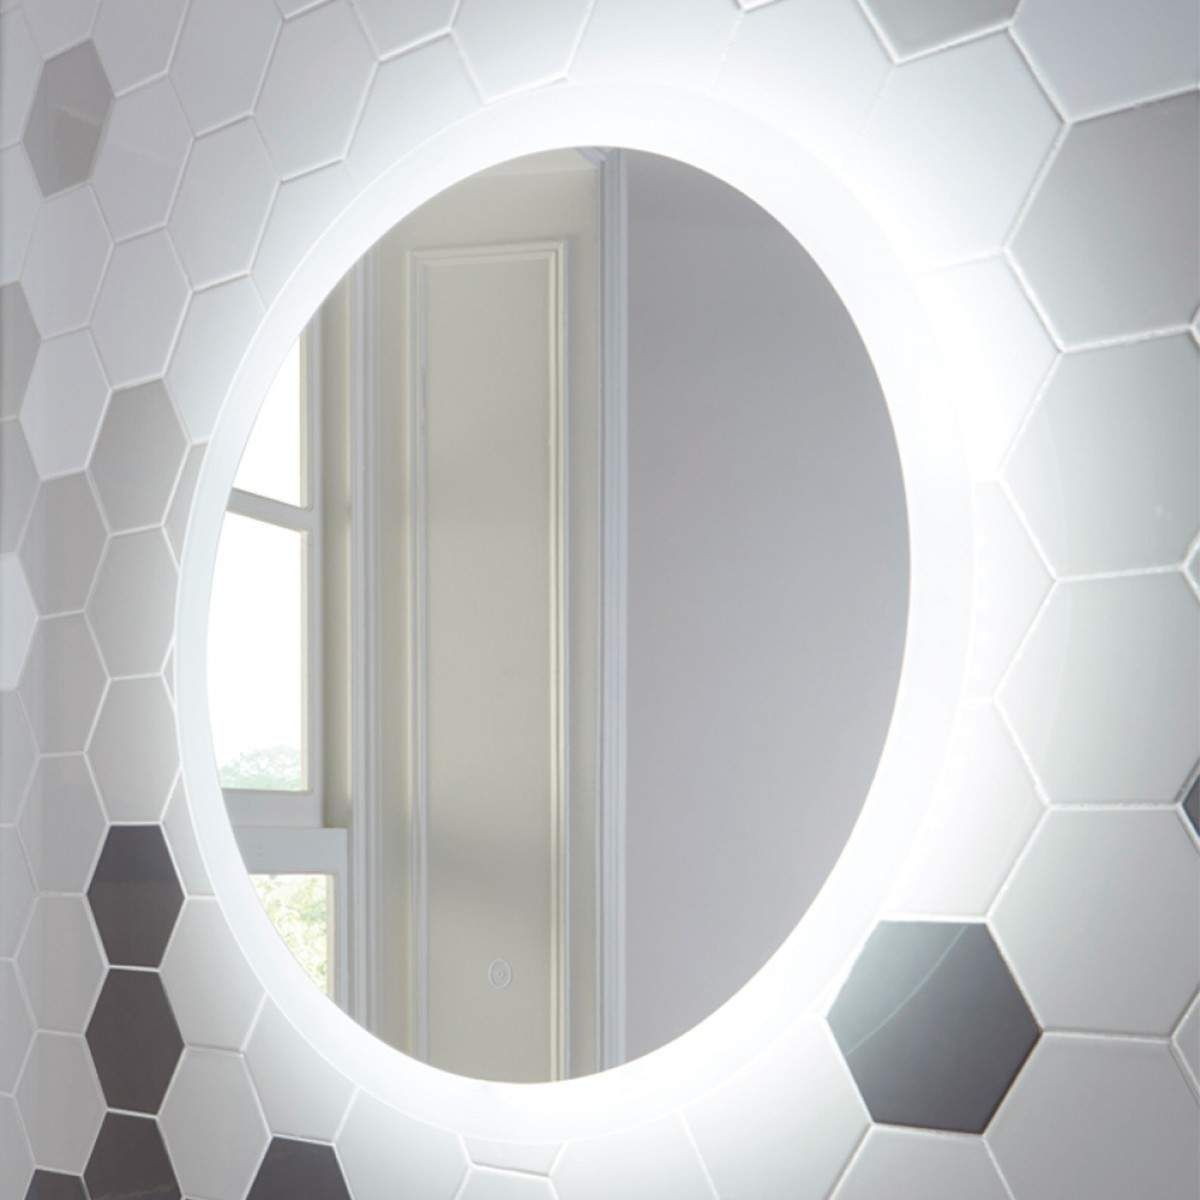 Harbour Glow Round Led Mirror With Demister Pad – 800Mm Intended For Celeste Frameless Round Wall Mirrors (View 15 of 20)